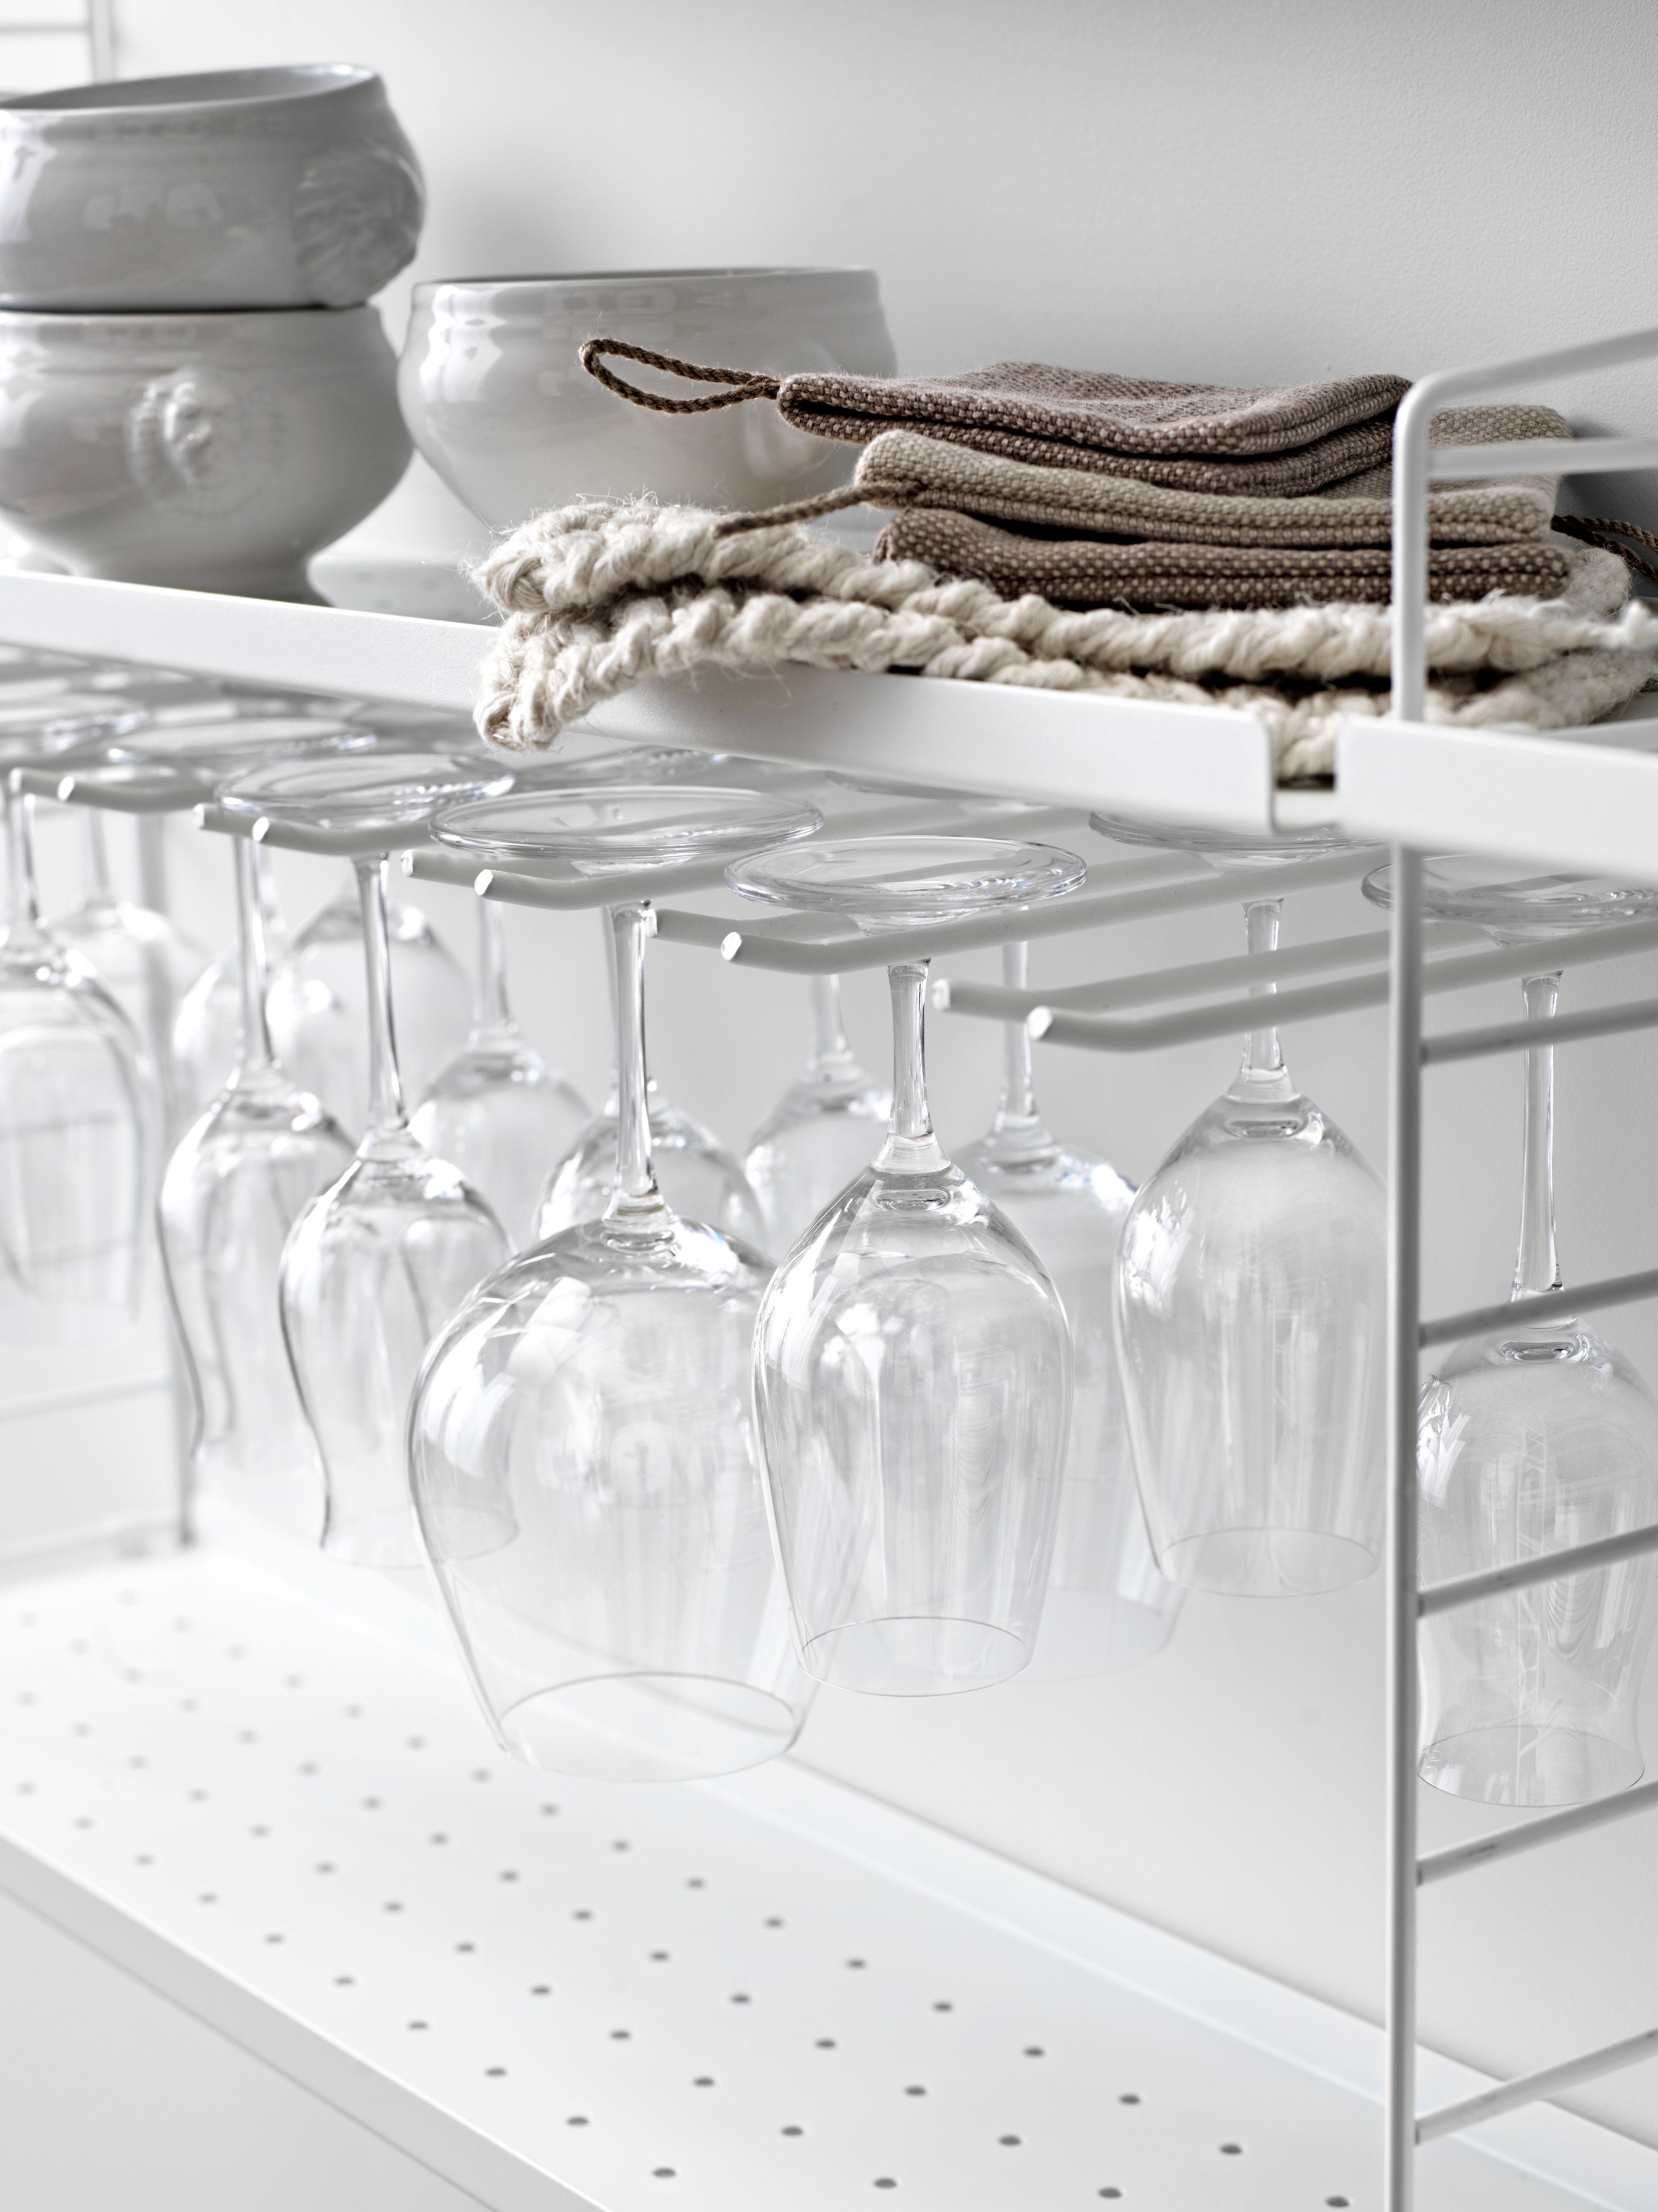 Wall mounted kitchen solution from String. Wall panels and metal shelves low in white. White hanger racks.